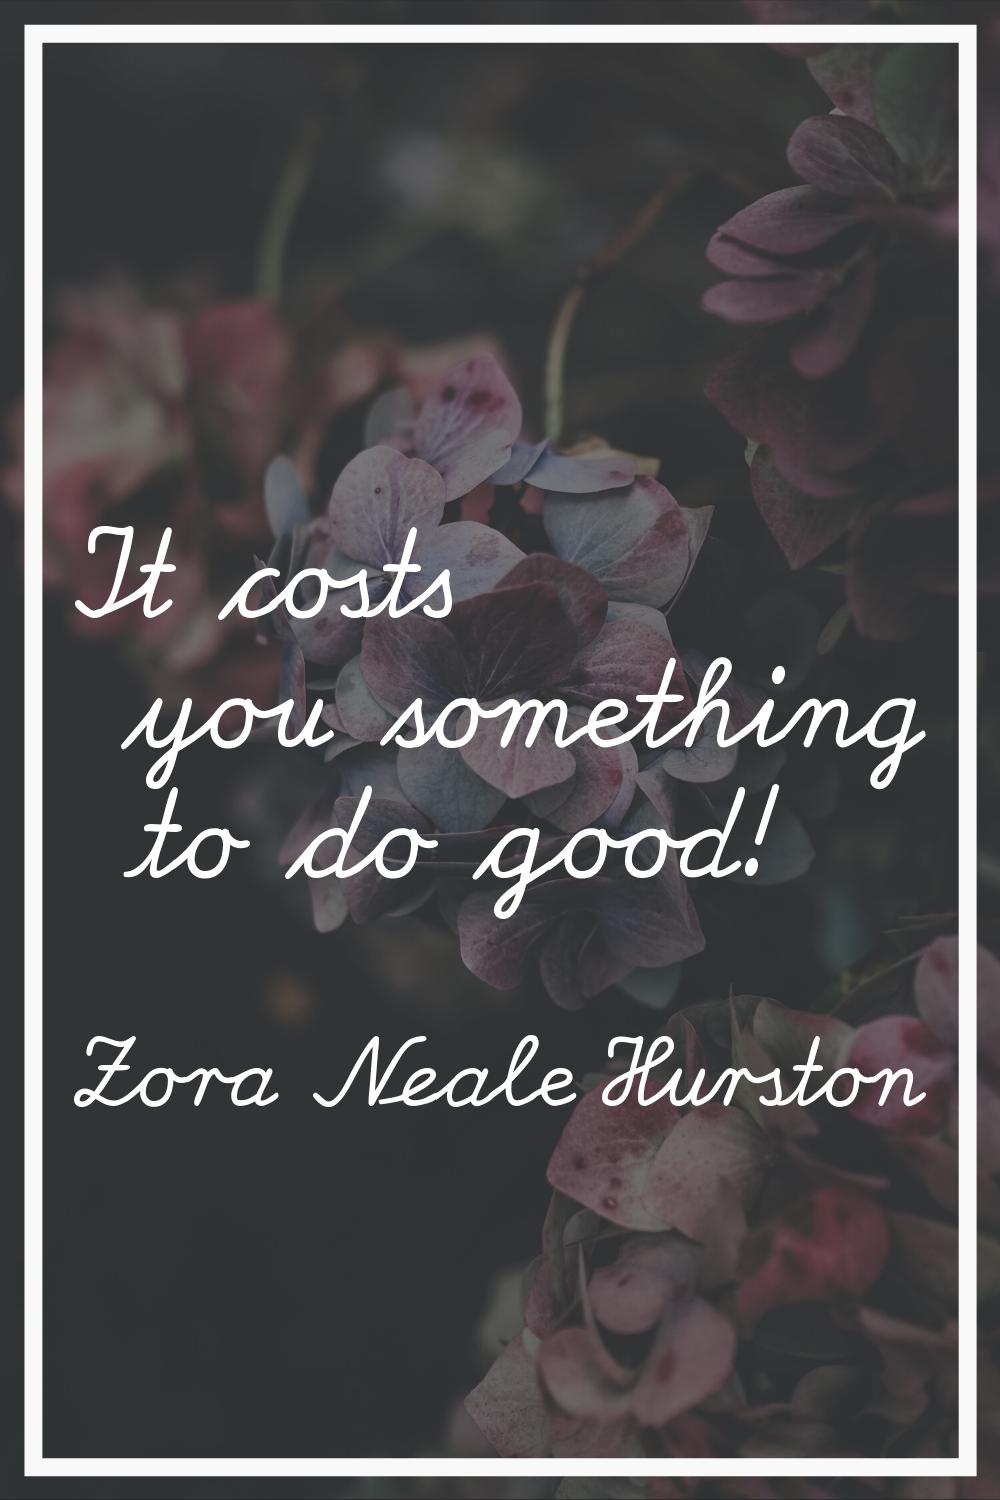 It costs you something to do good!